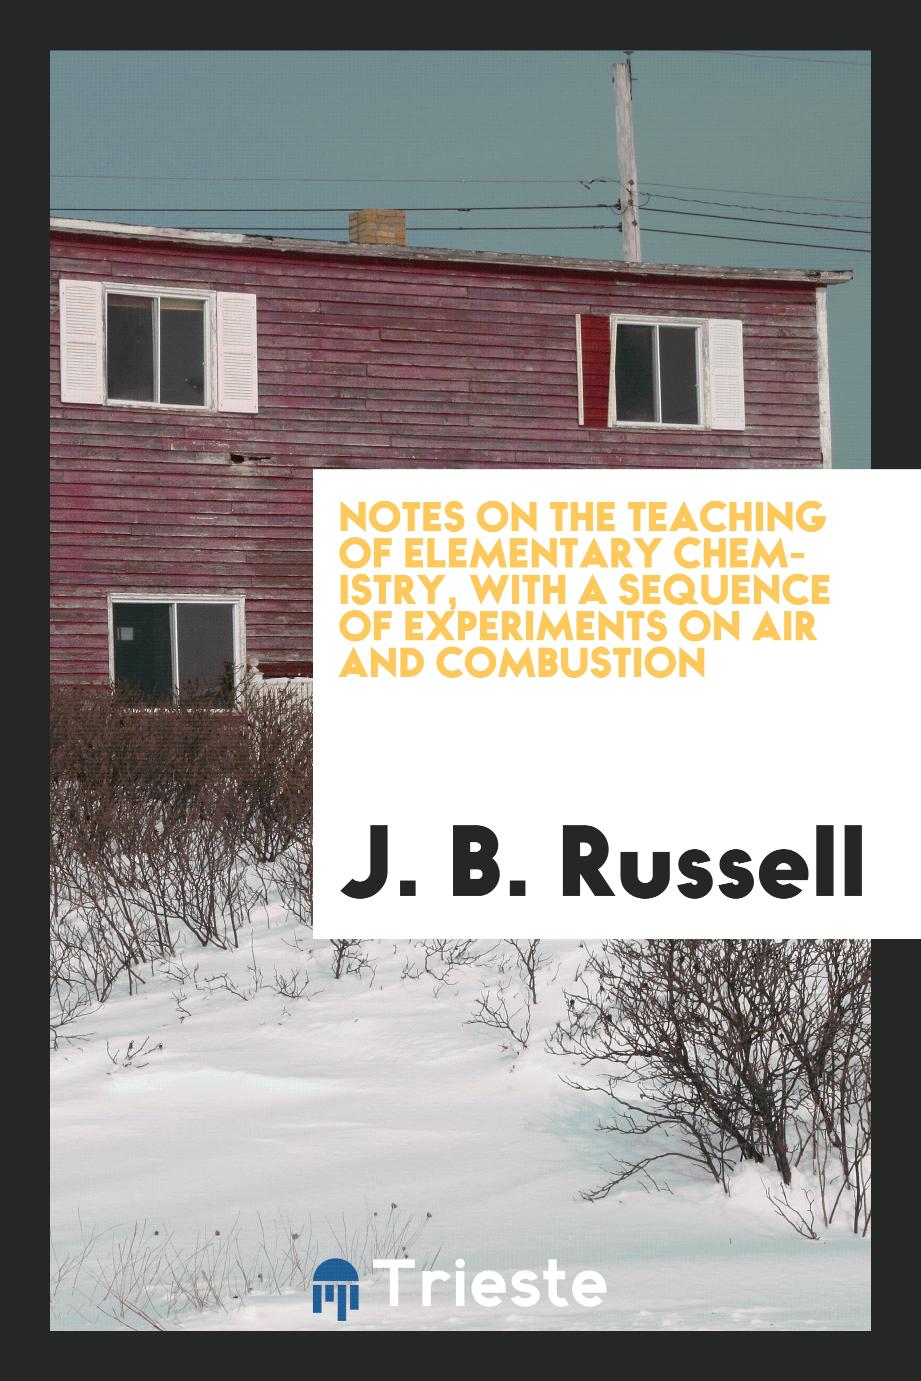 Notes on the teaching of elementary chemistry, with a sequence of experiments on air and combustion